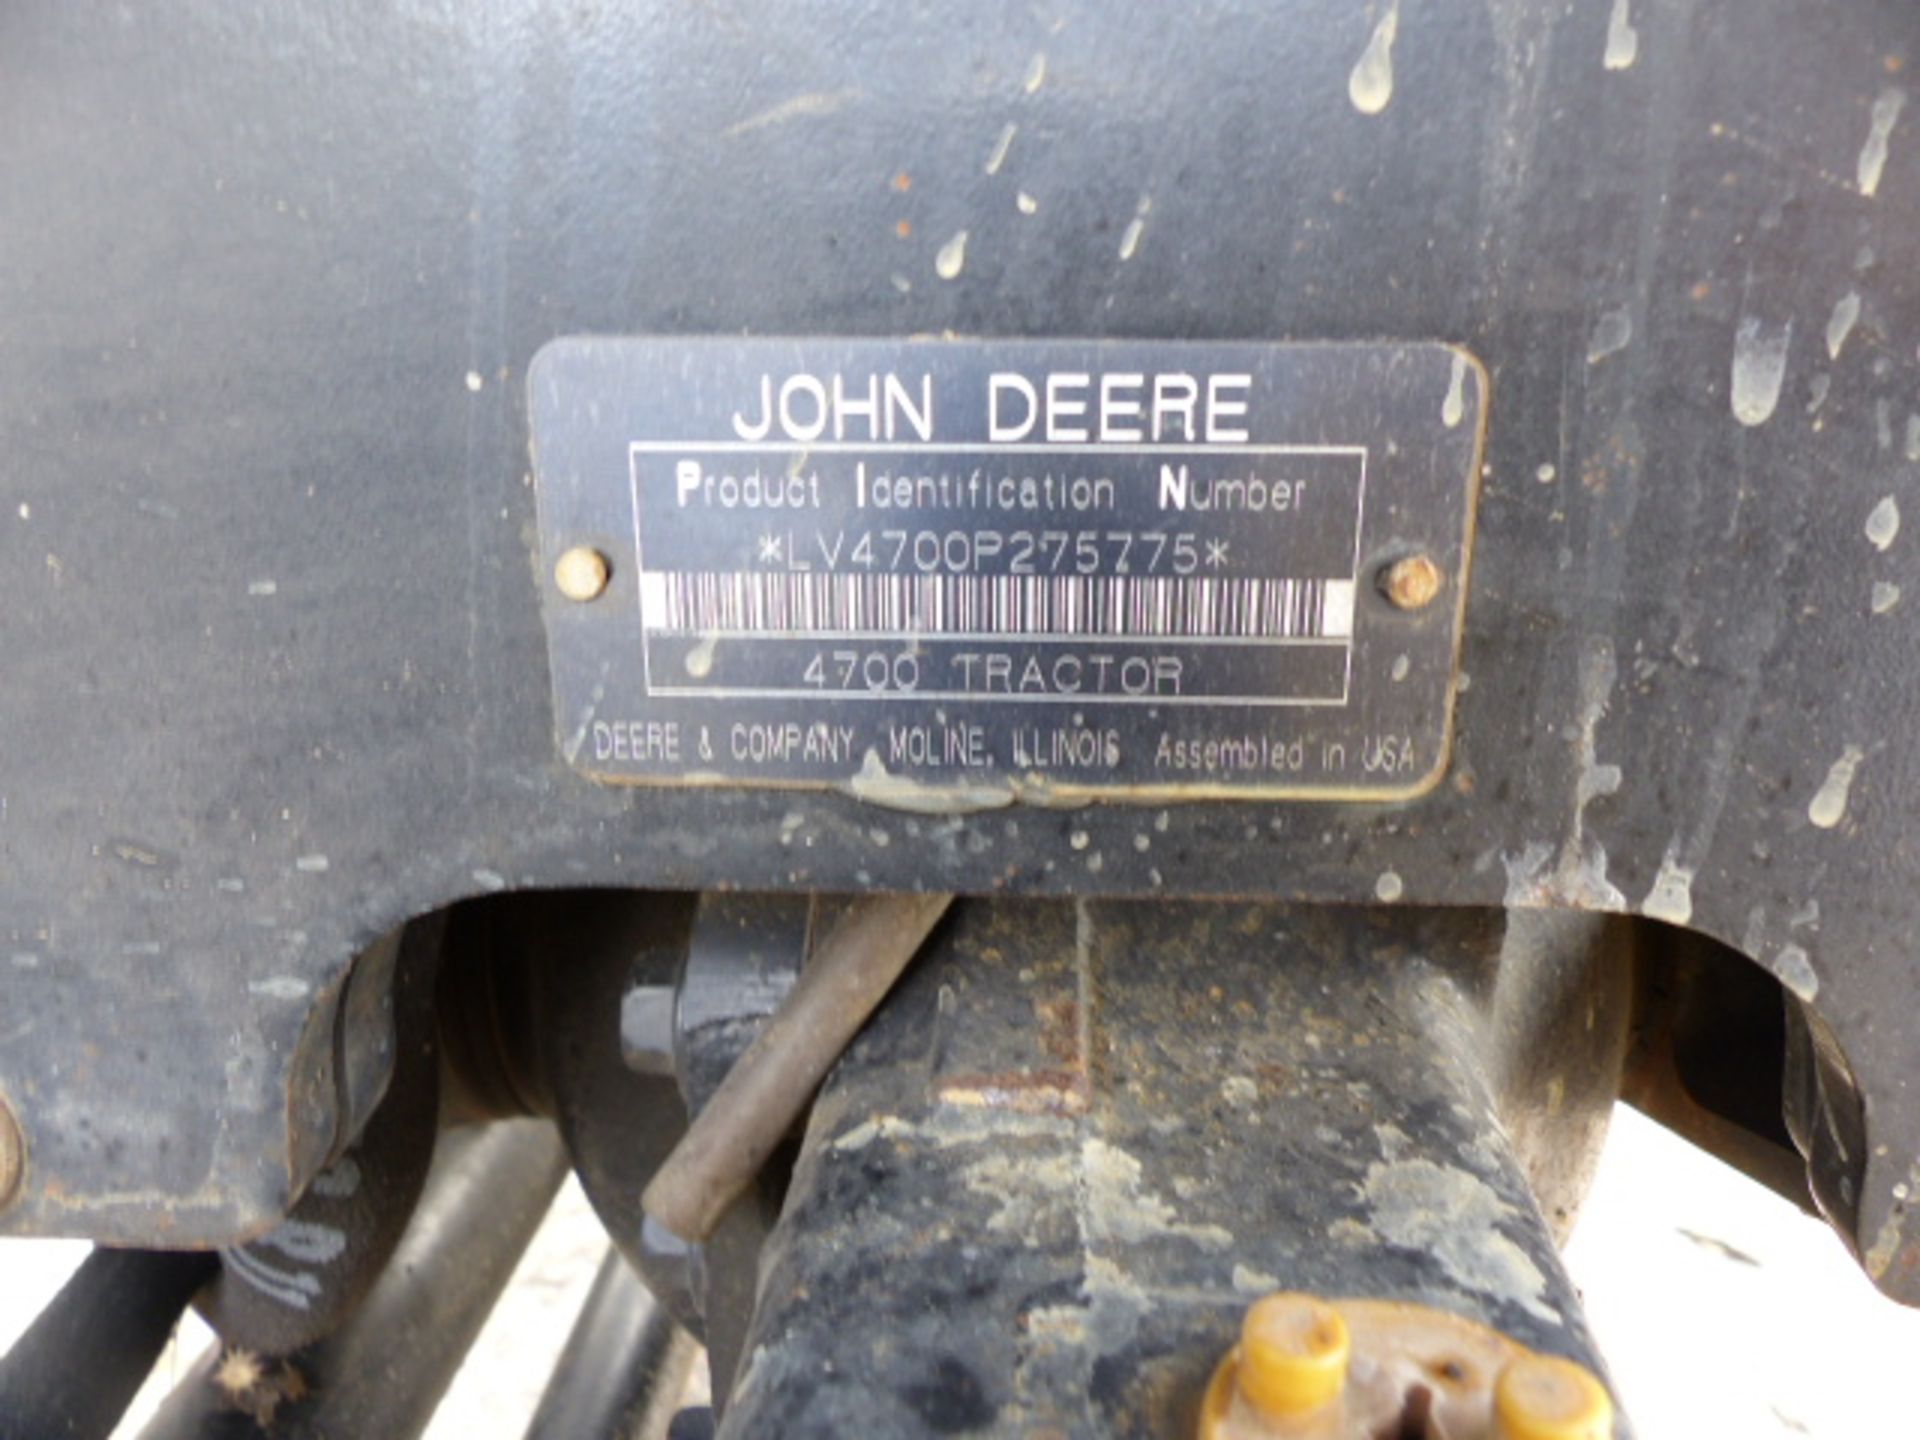 JD 4700 TRACTOR - Image 8 of 11